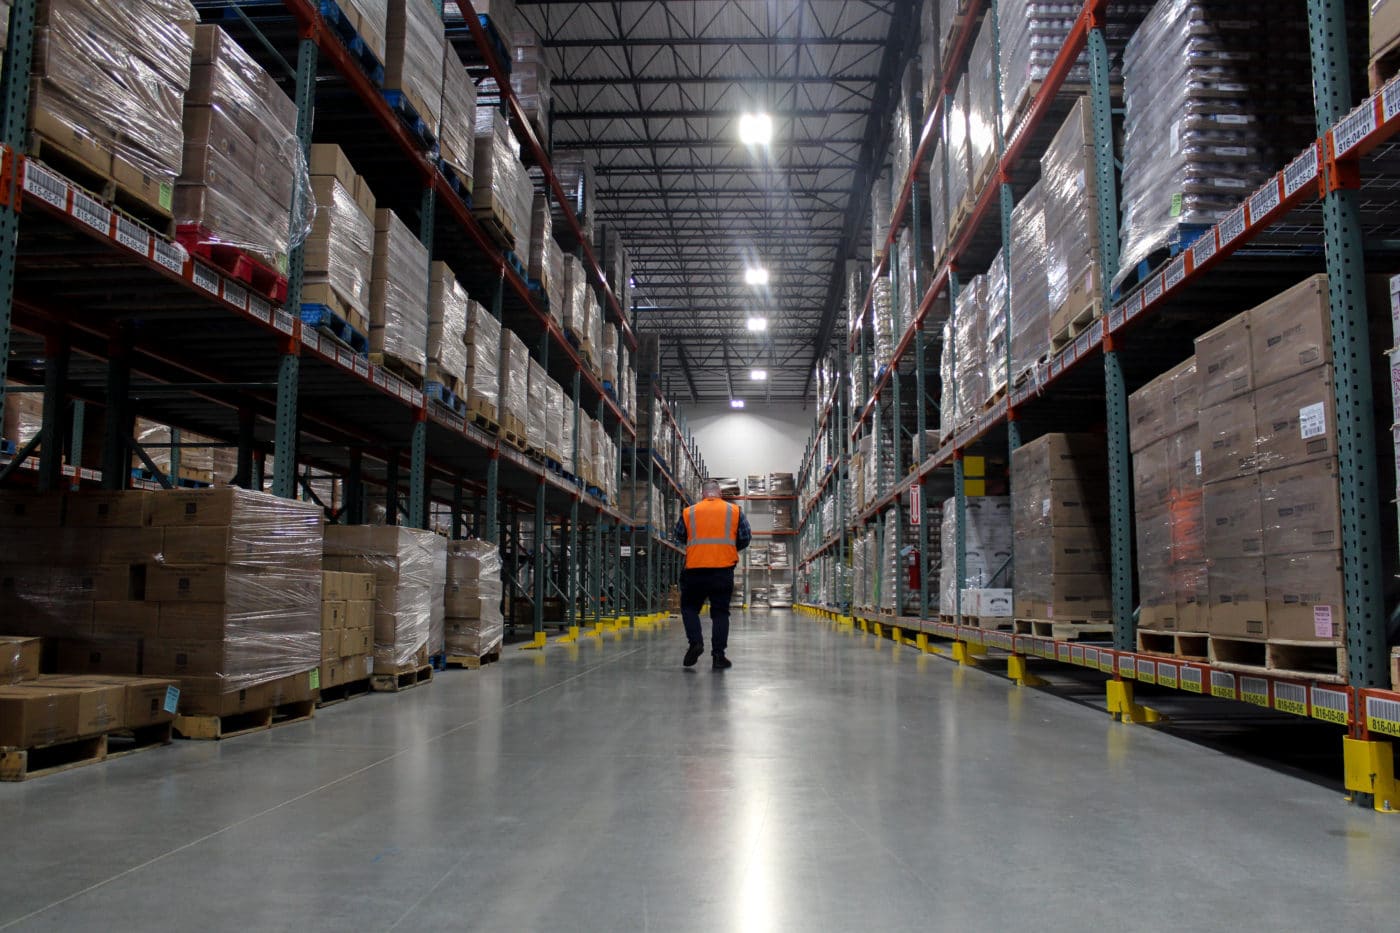 Warehouse aisle with boxes man in orange safety vest